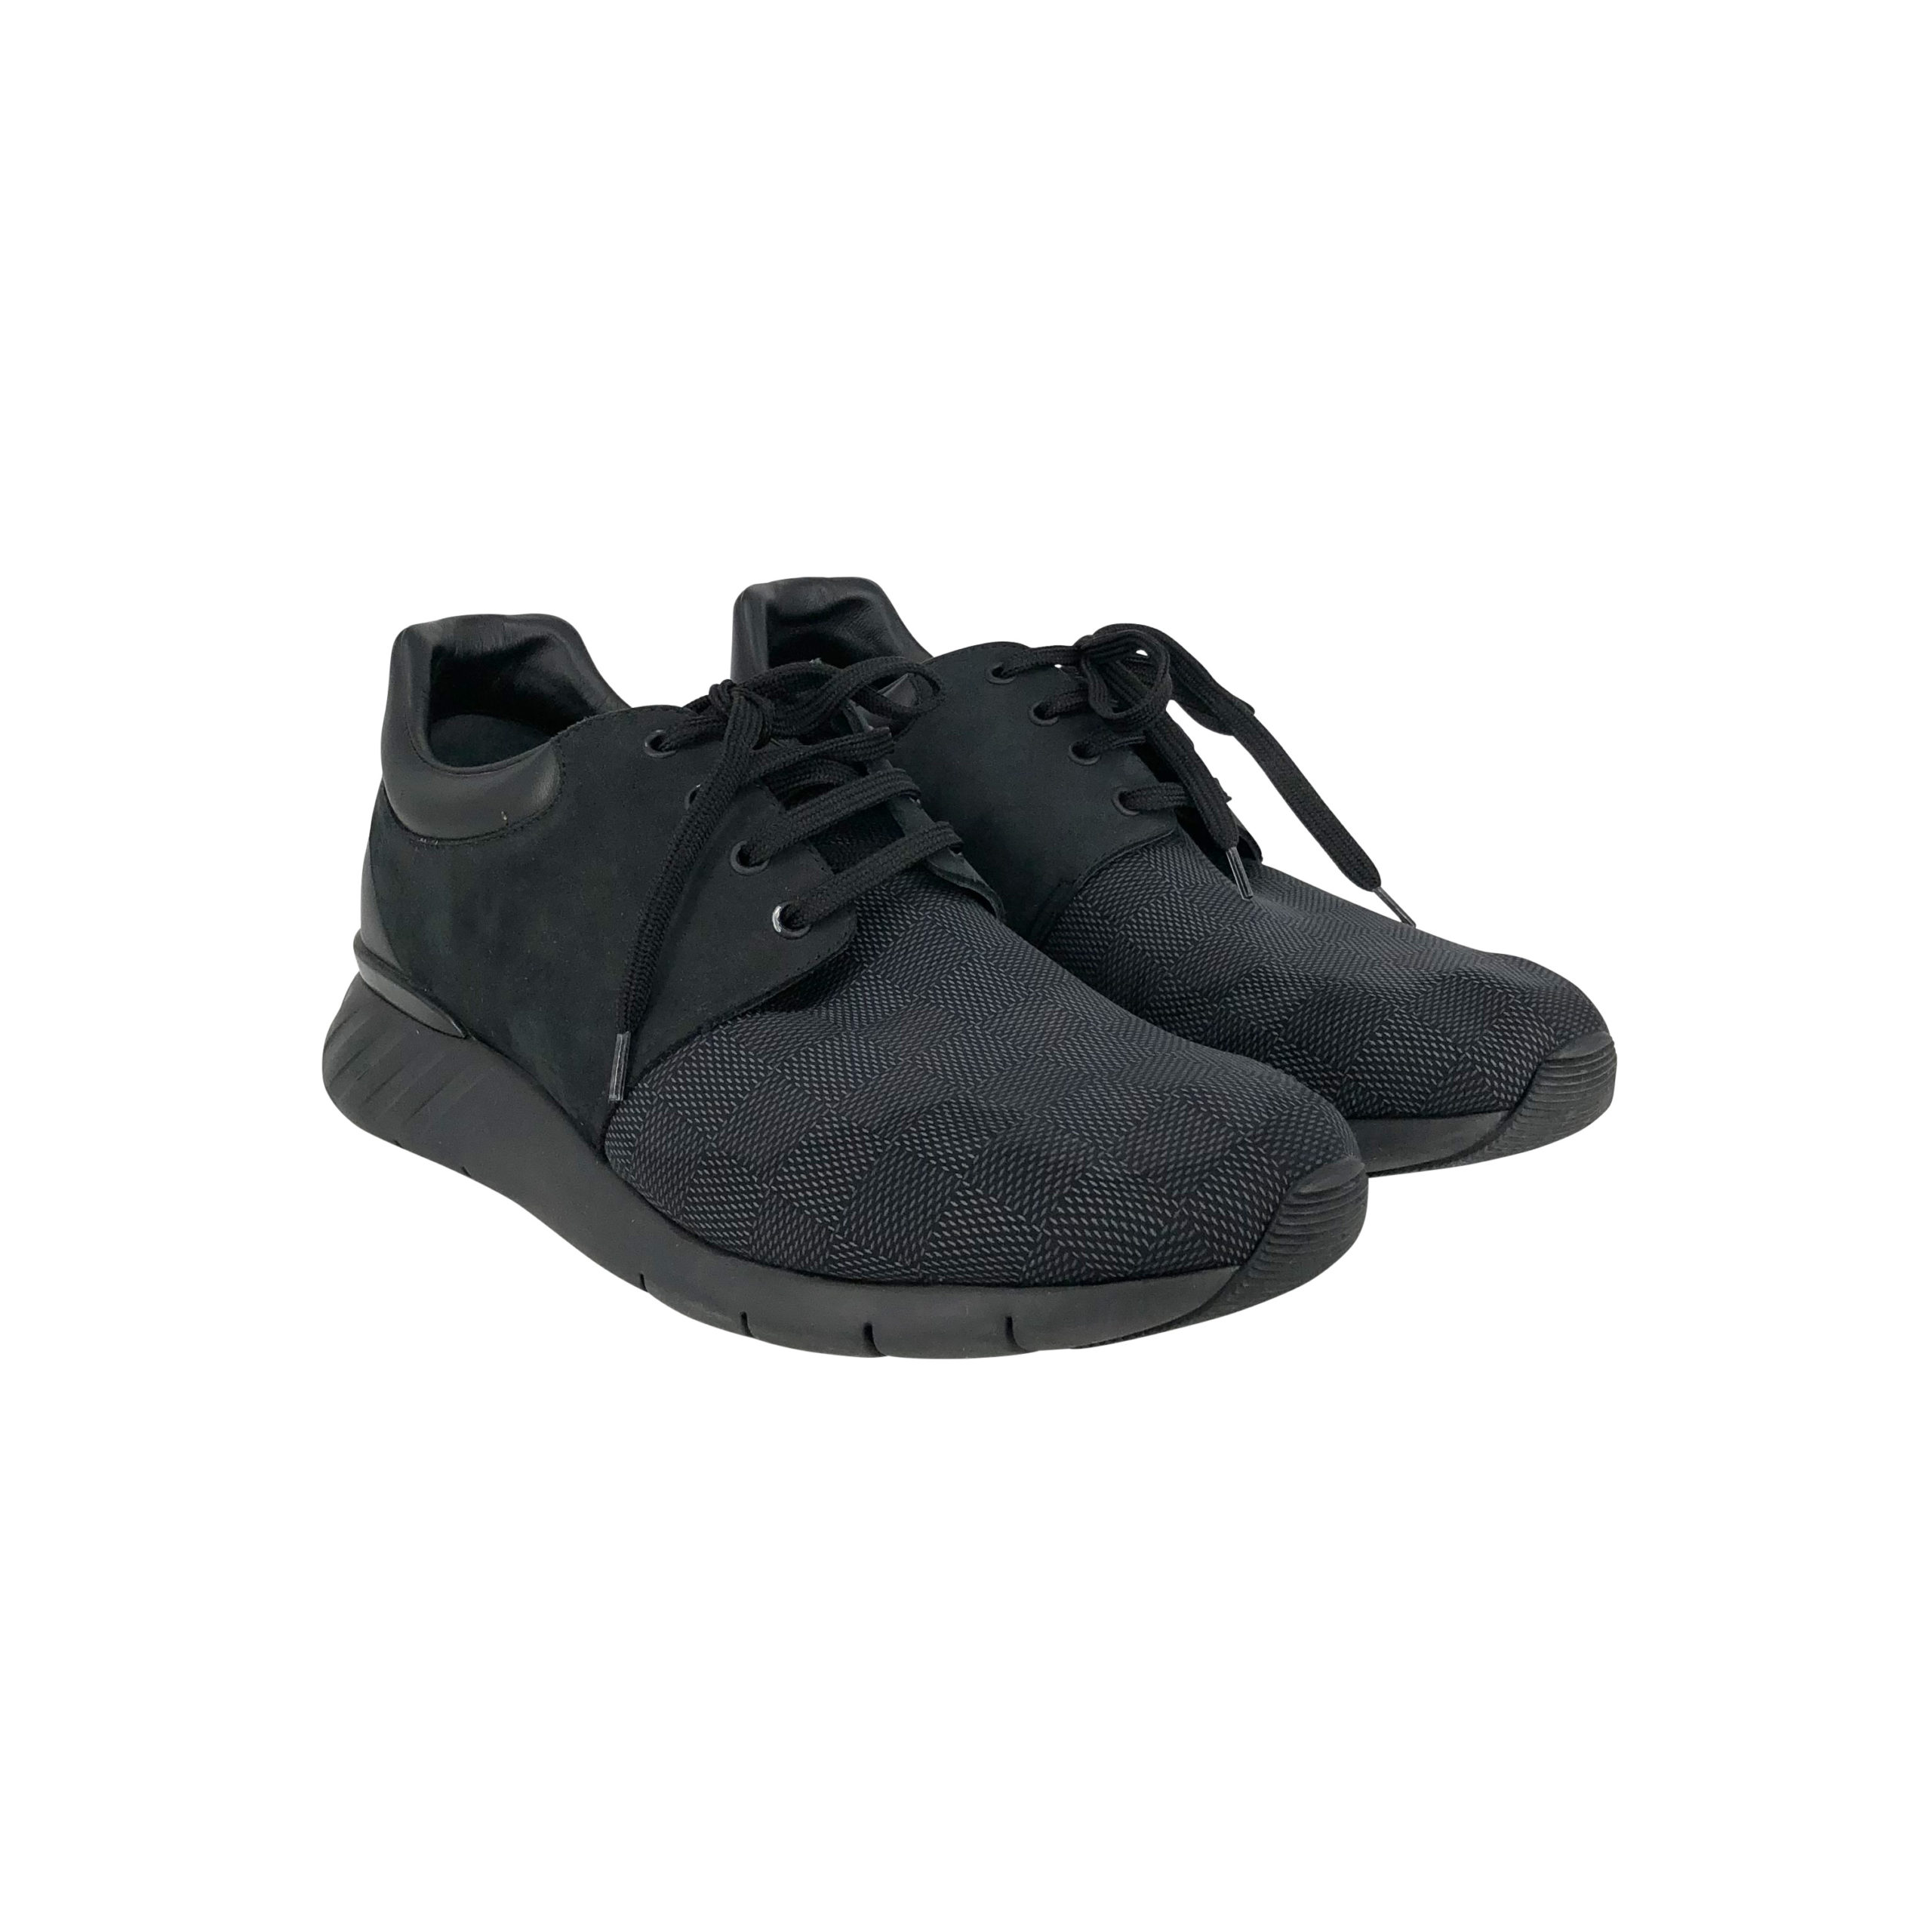 Louis Vuitton sneakers in black nylon with Damier - DOWNTOWN